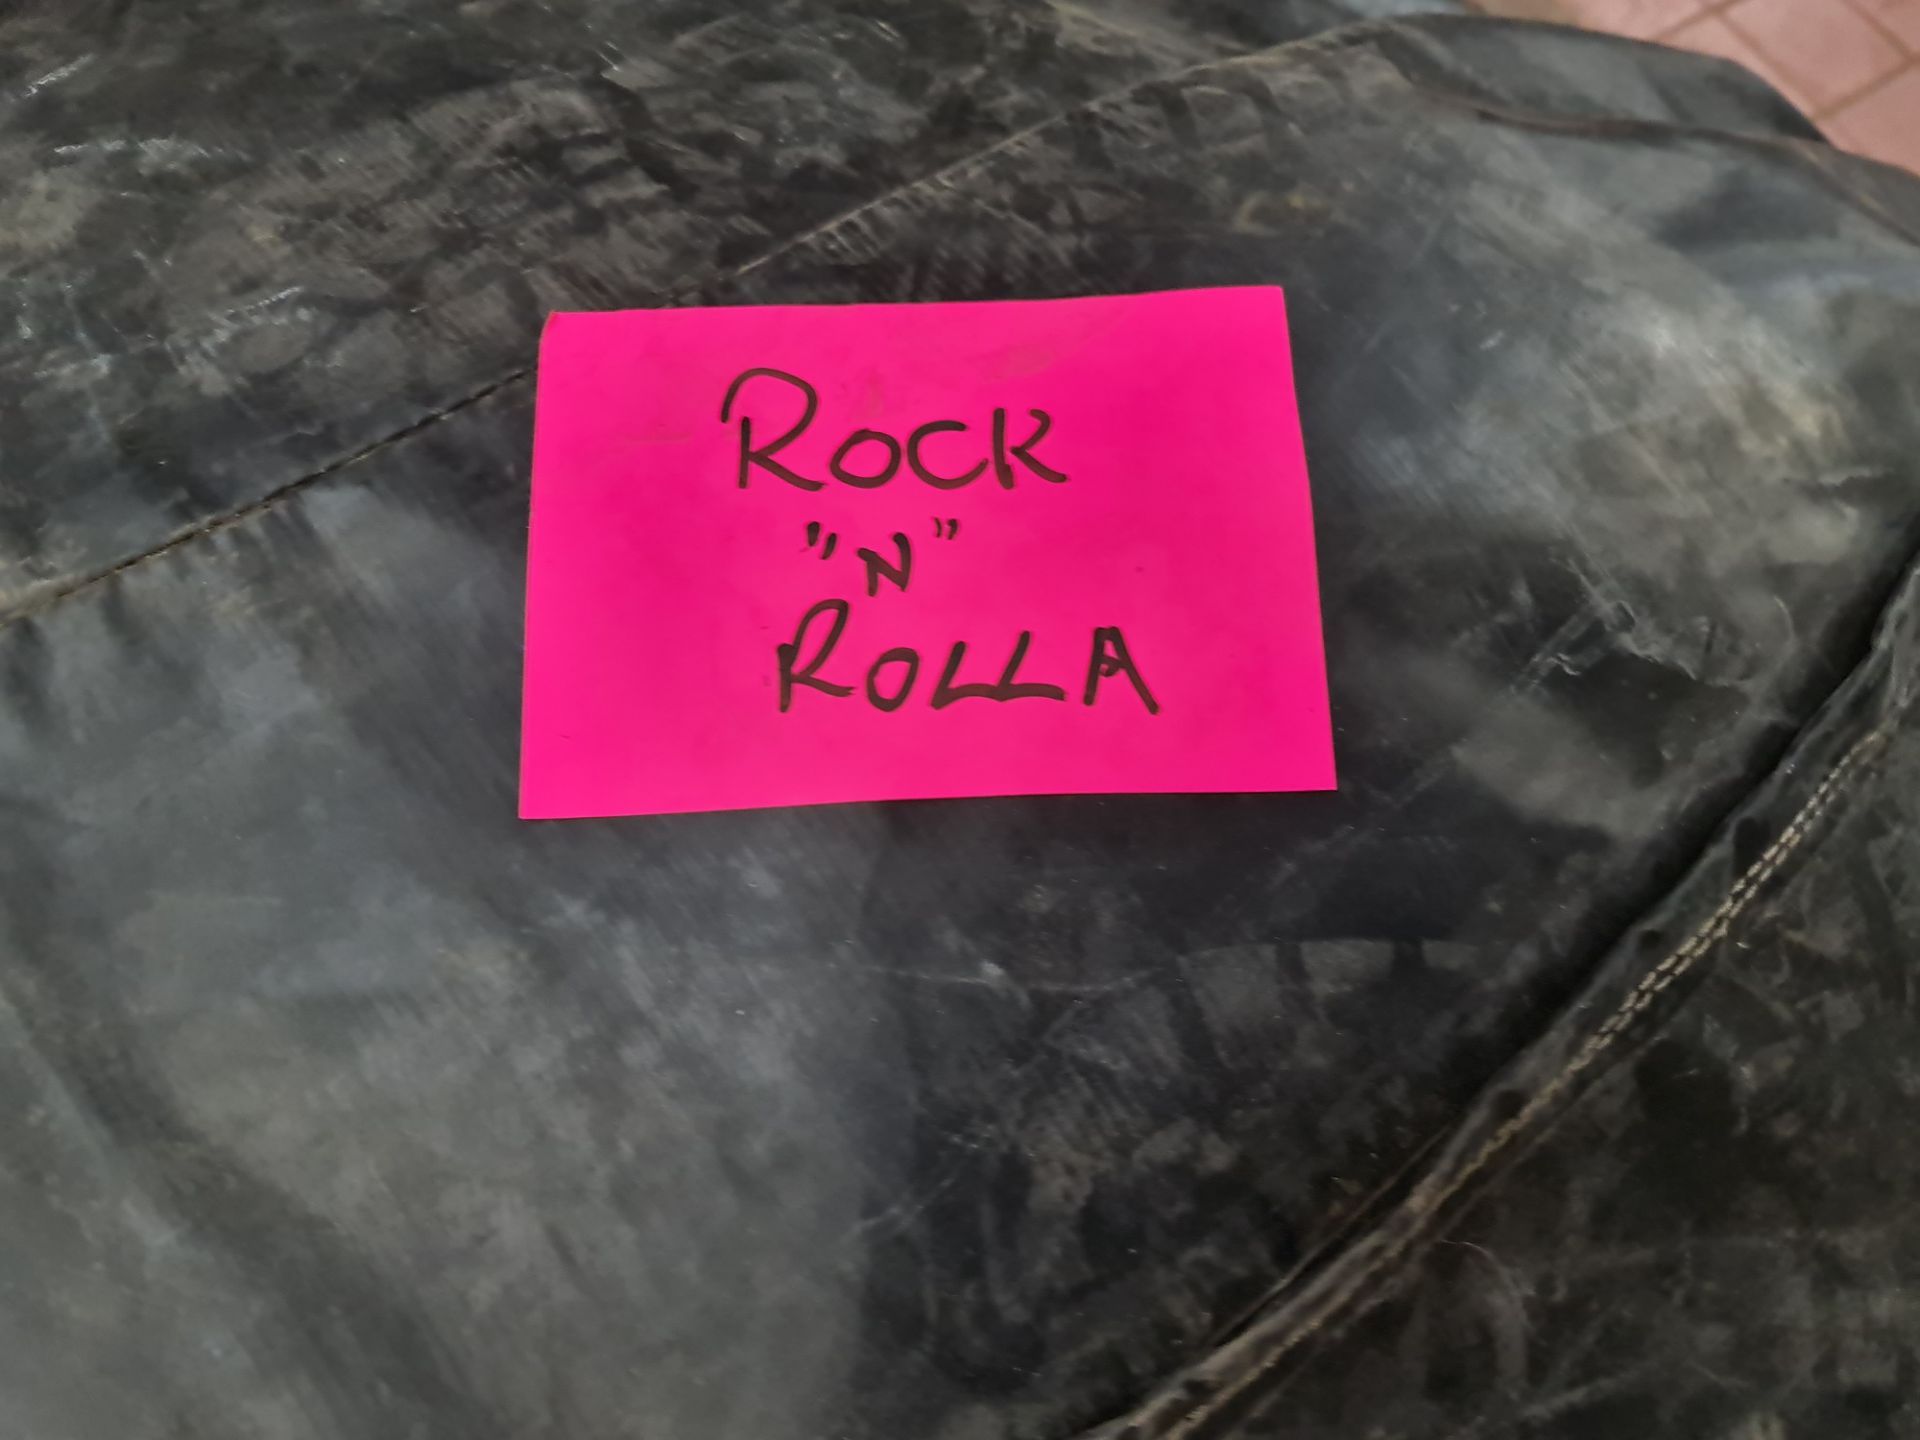 Rock & roller inflatable - this item is understood to have damage in several places which it is esti - Image 4 of 6